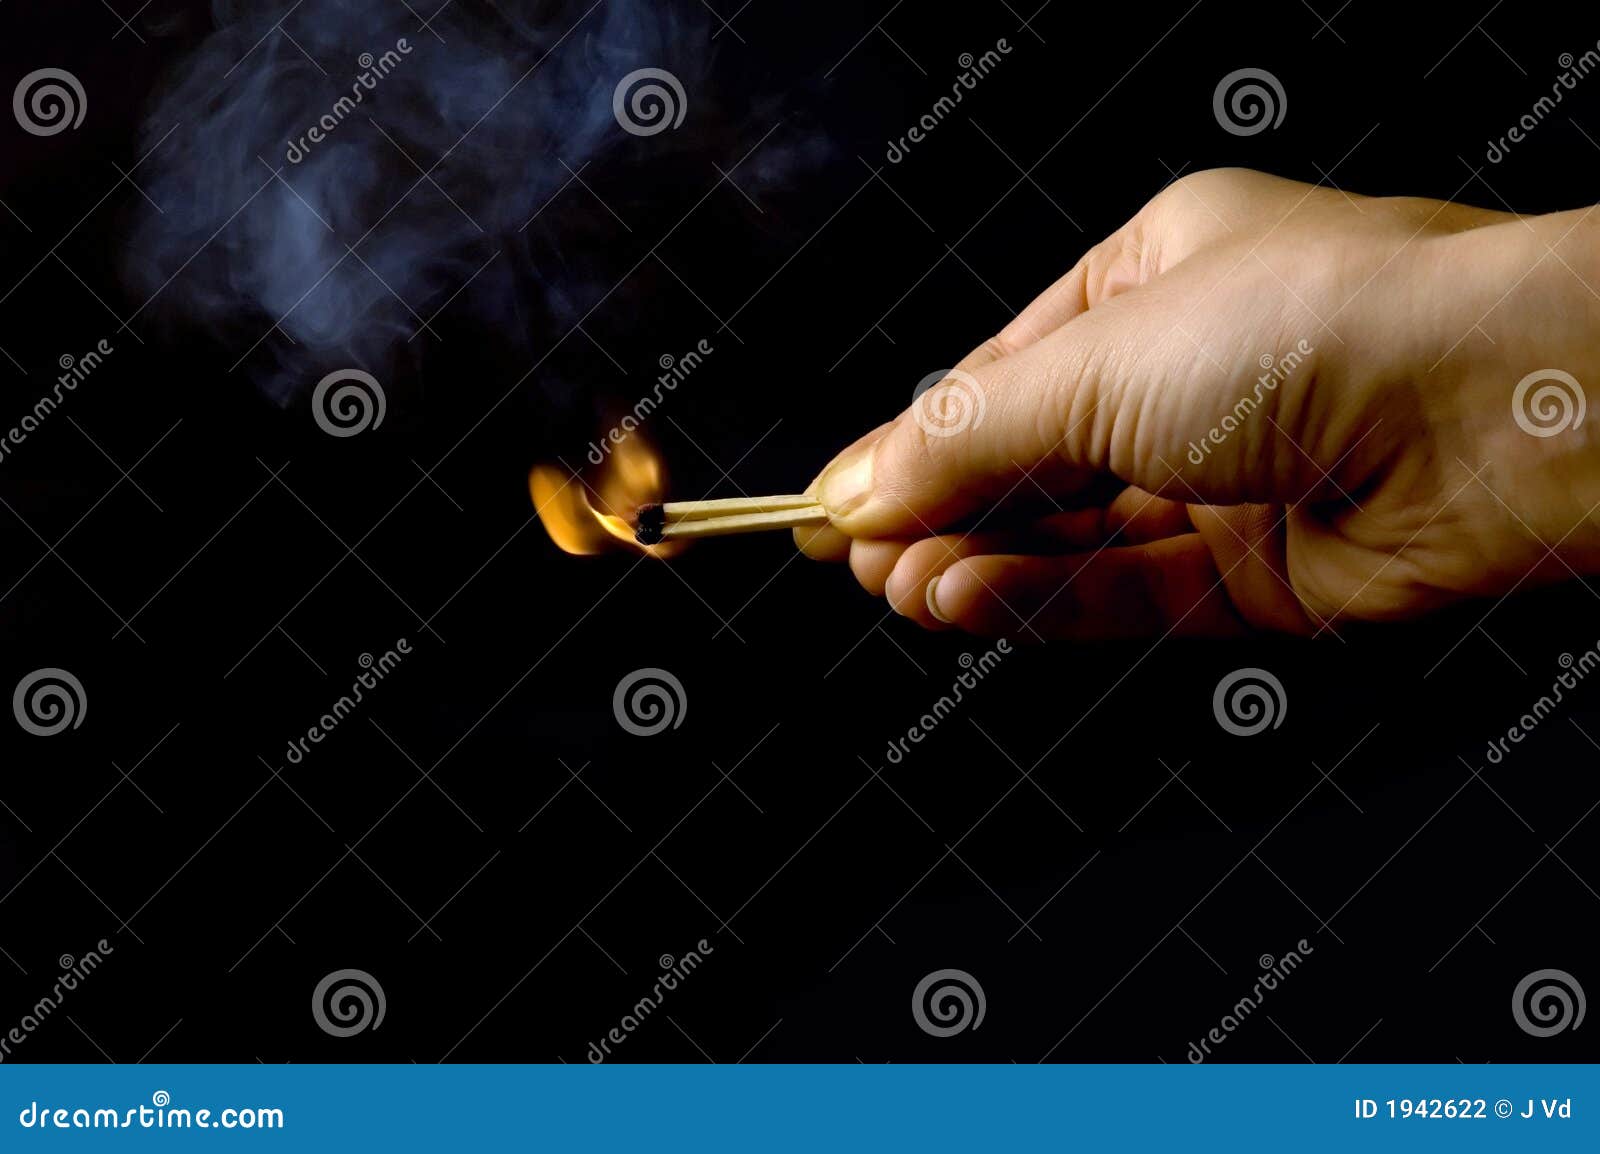 hand holding a burning match